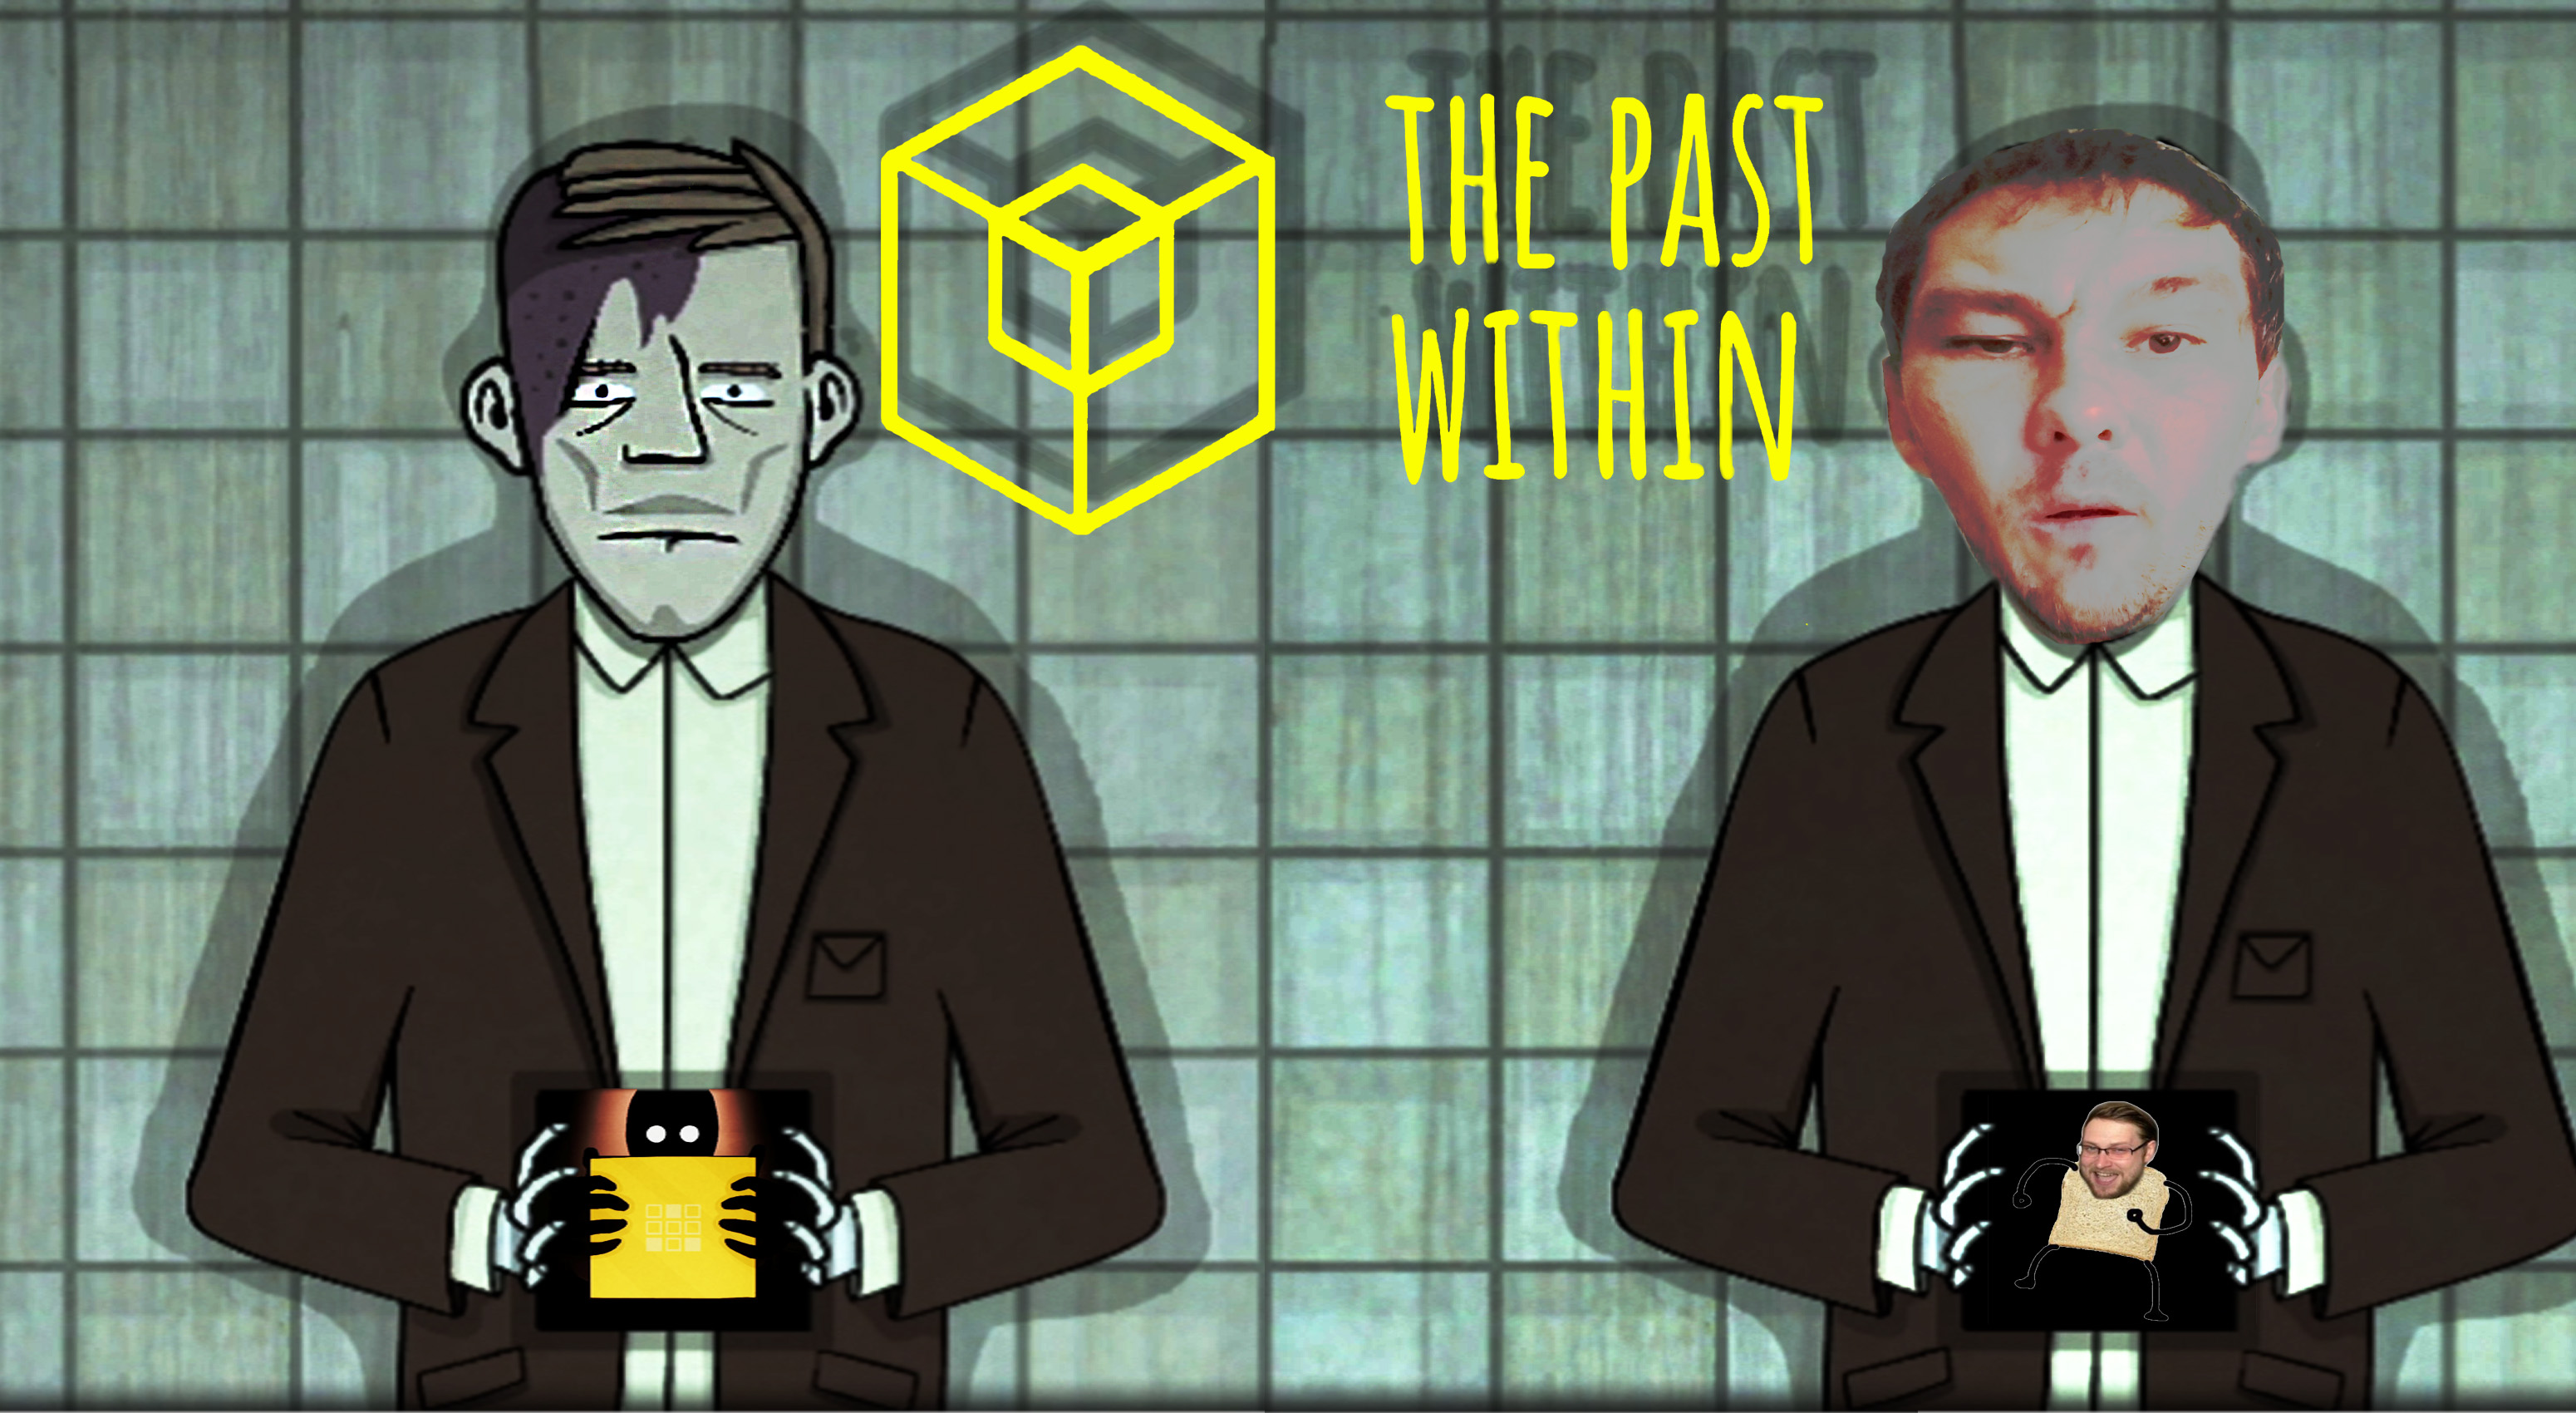 The past within rusty. Игра Rusty Lake the past within. Расти Лейк the past within. The past within Rusty Lake ответы. The past within within Rusty Lake.